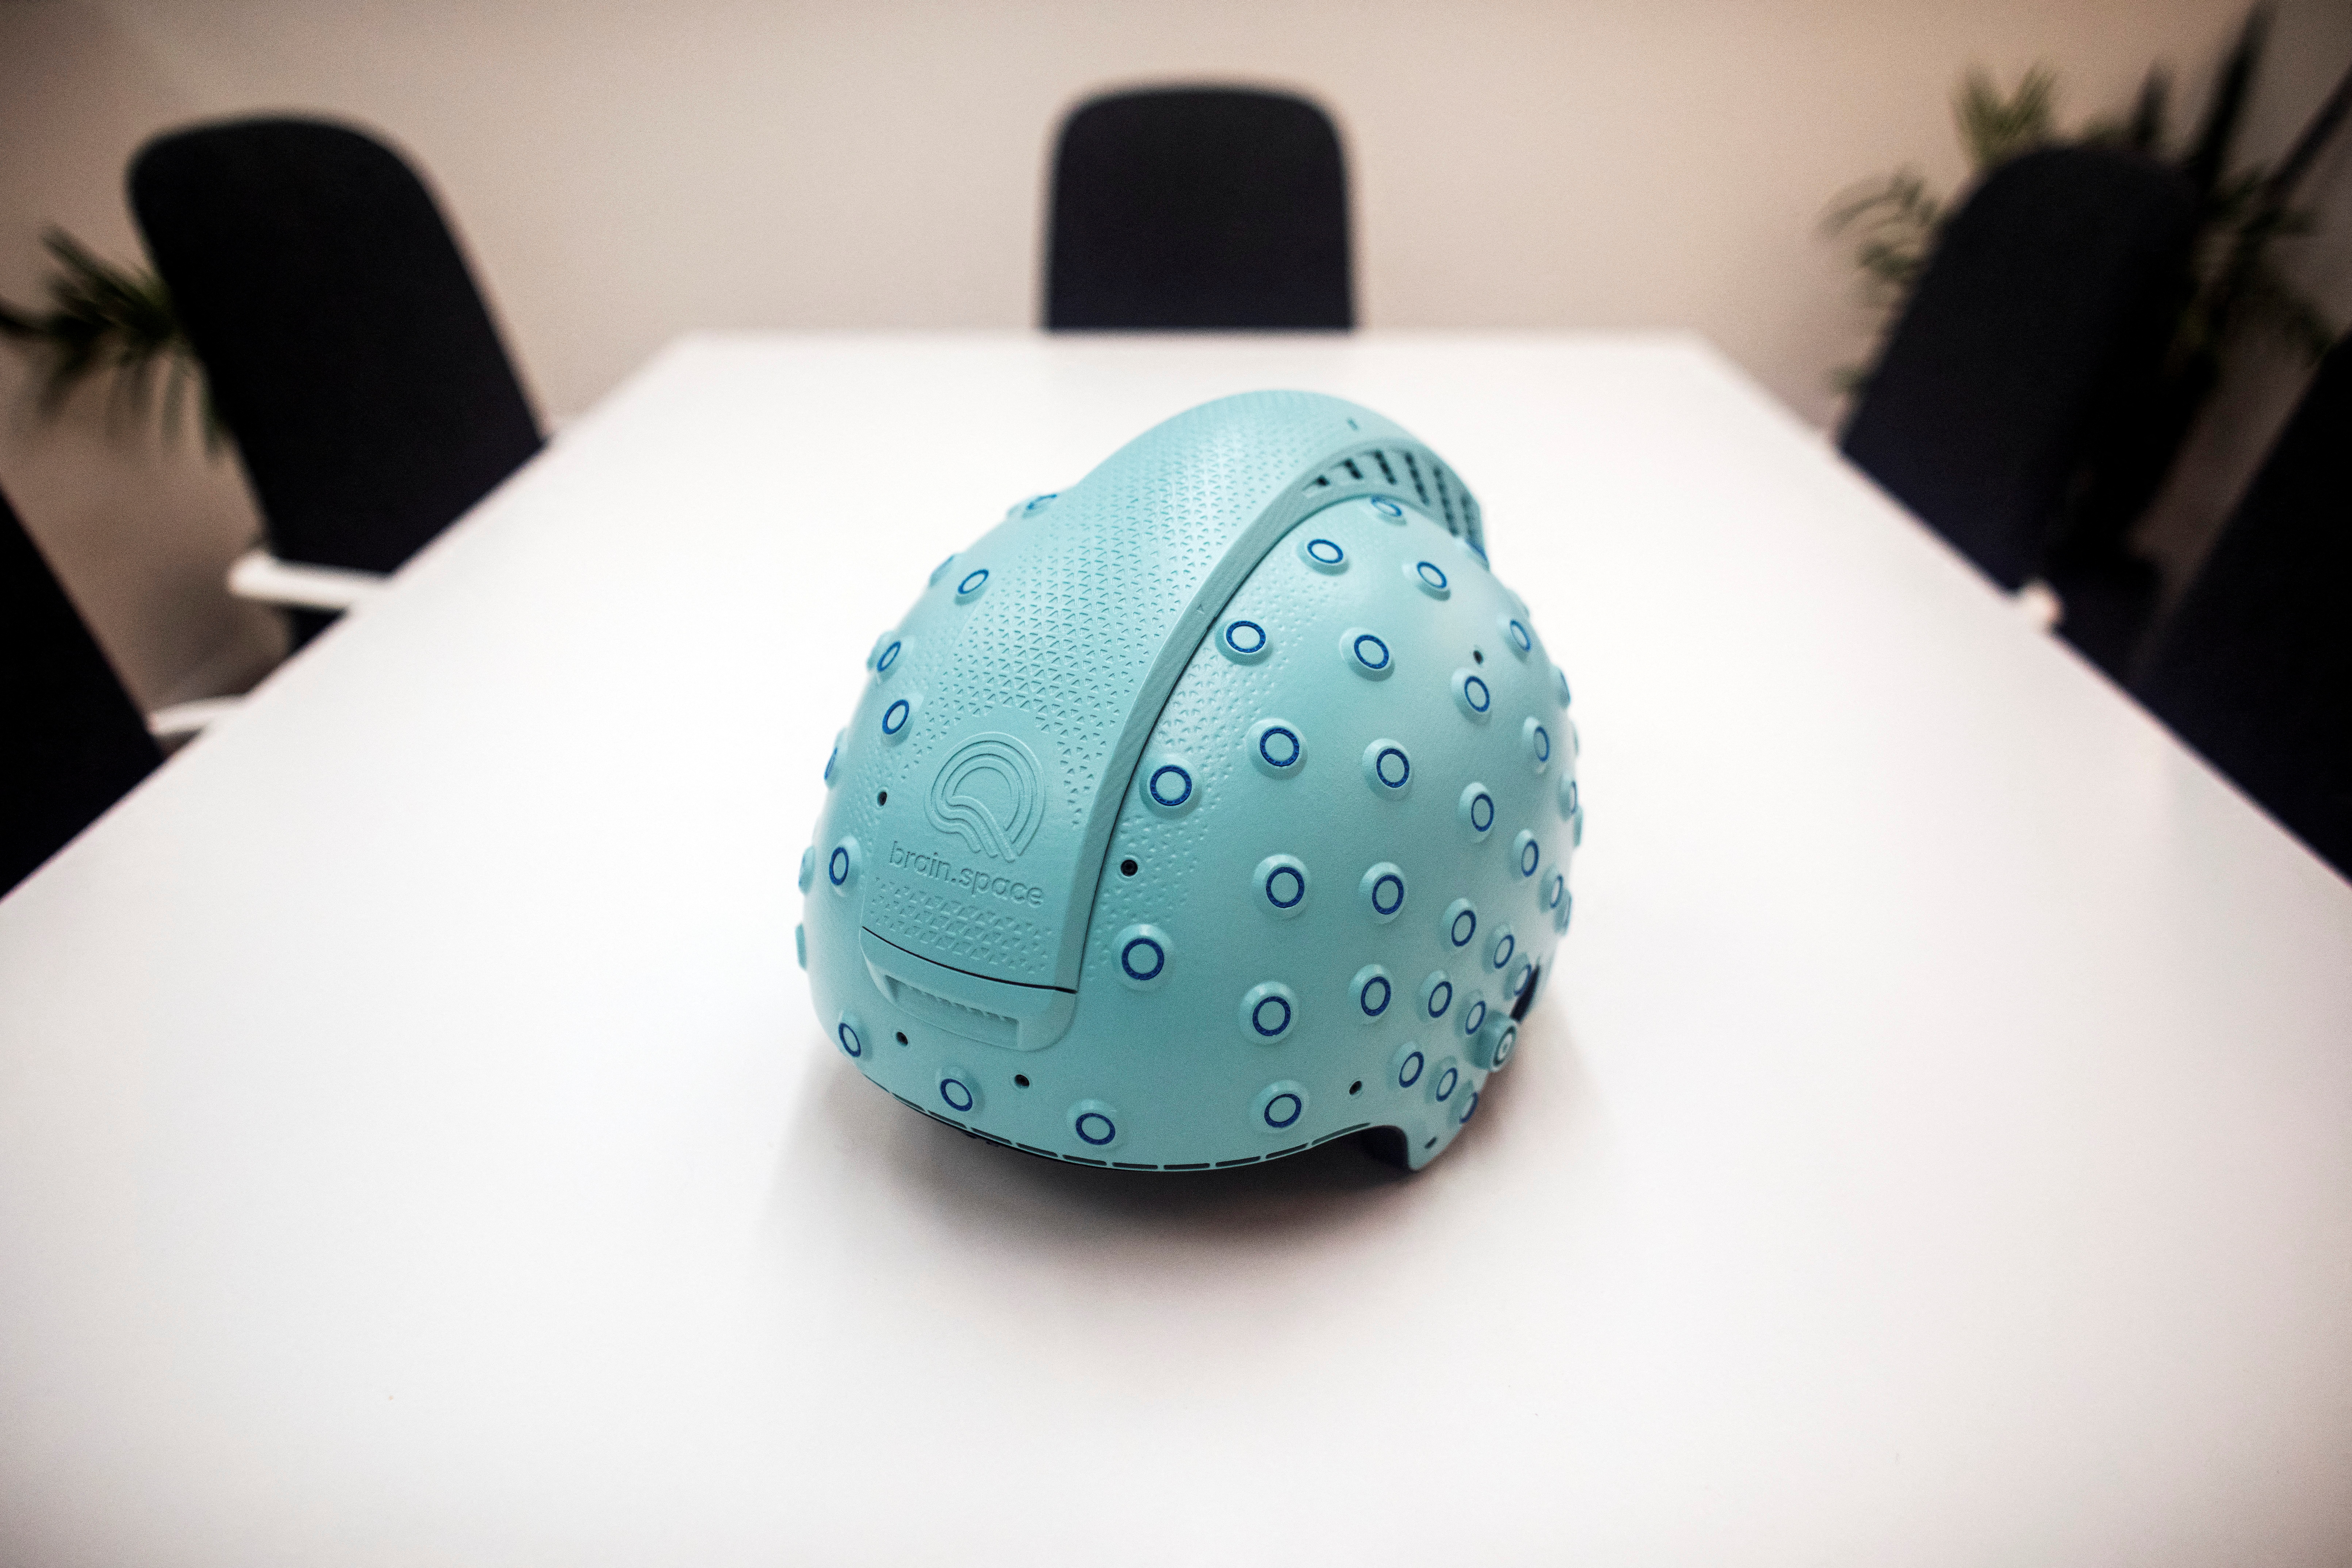 An EEG enabled helmet, due to be used in an experiment on the impact of a microgravity environment on brain activity is displayed at Israeli startup Brain.Space in Tel Aviv